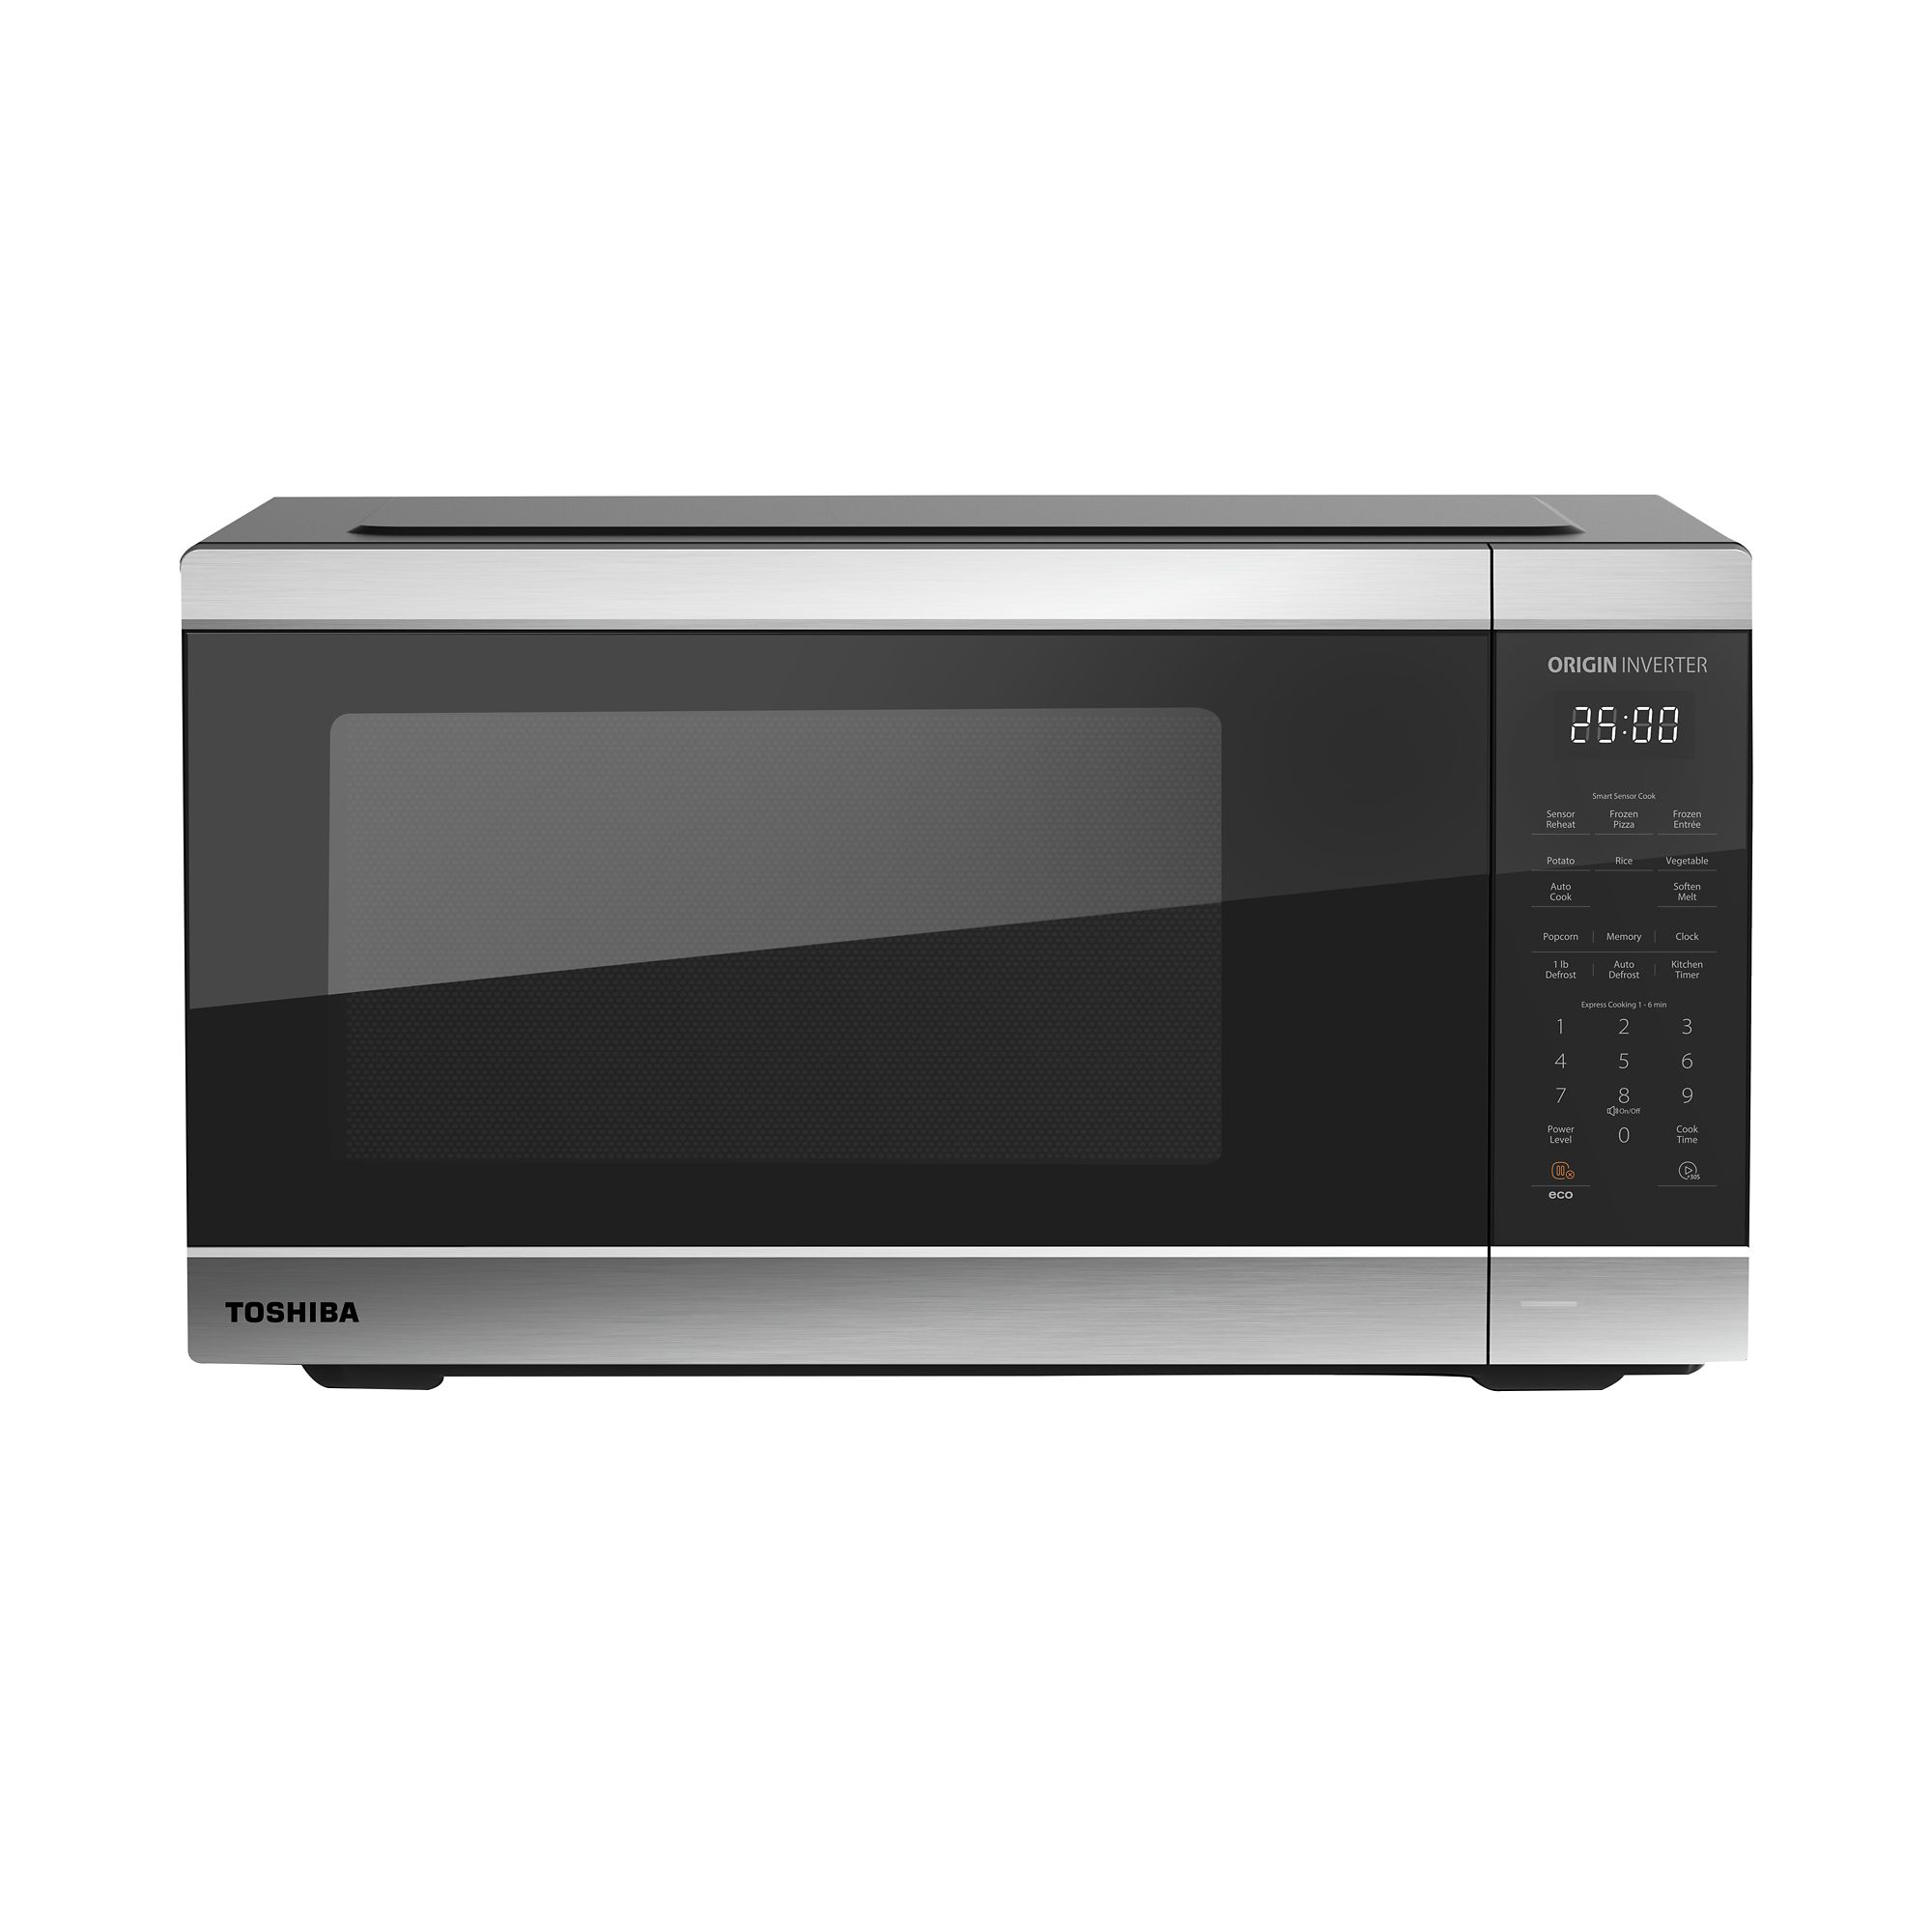 Toshiba Microwave Oven - appliances - by owner - sale - craigslist